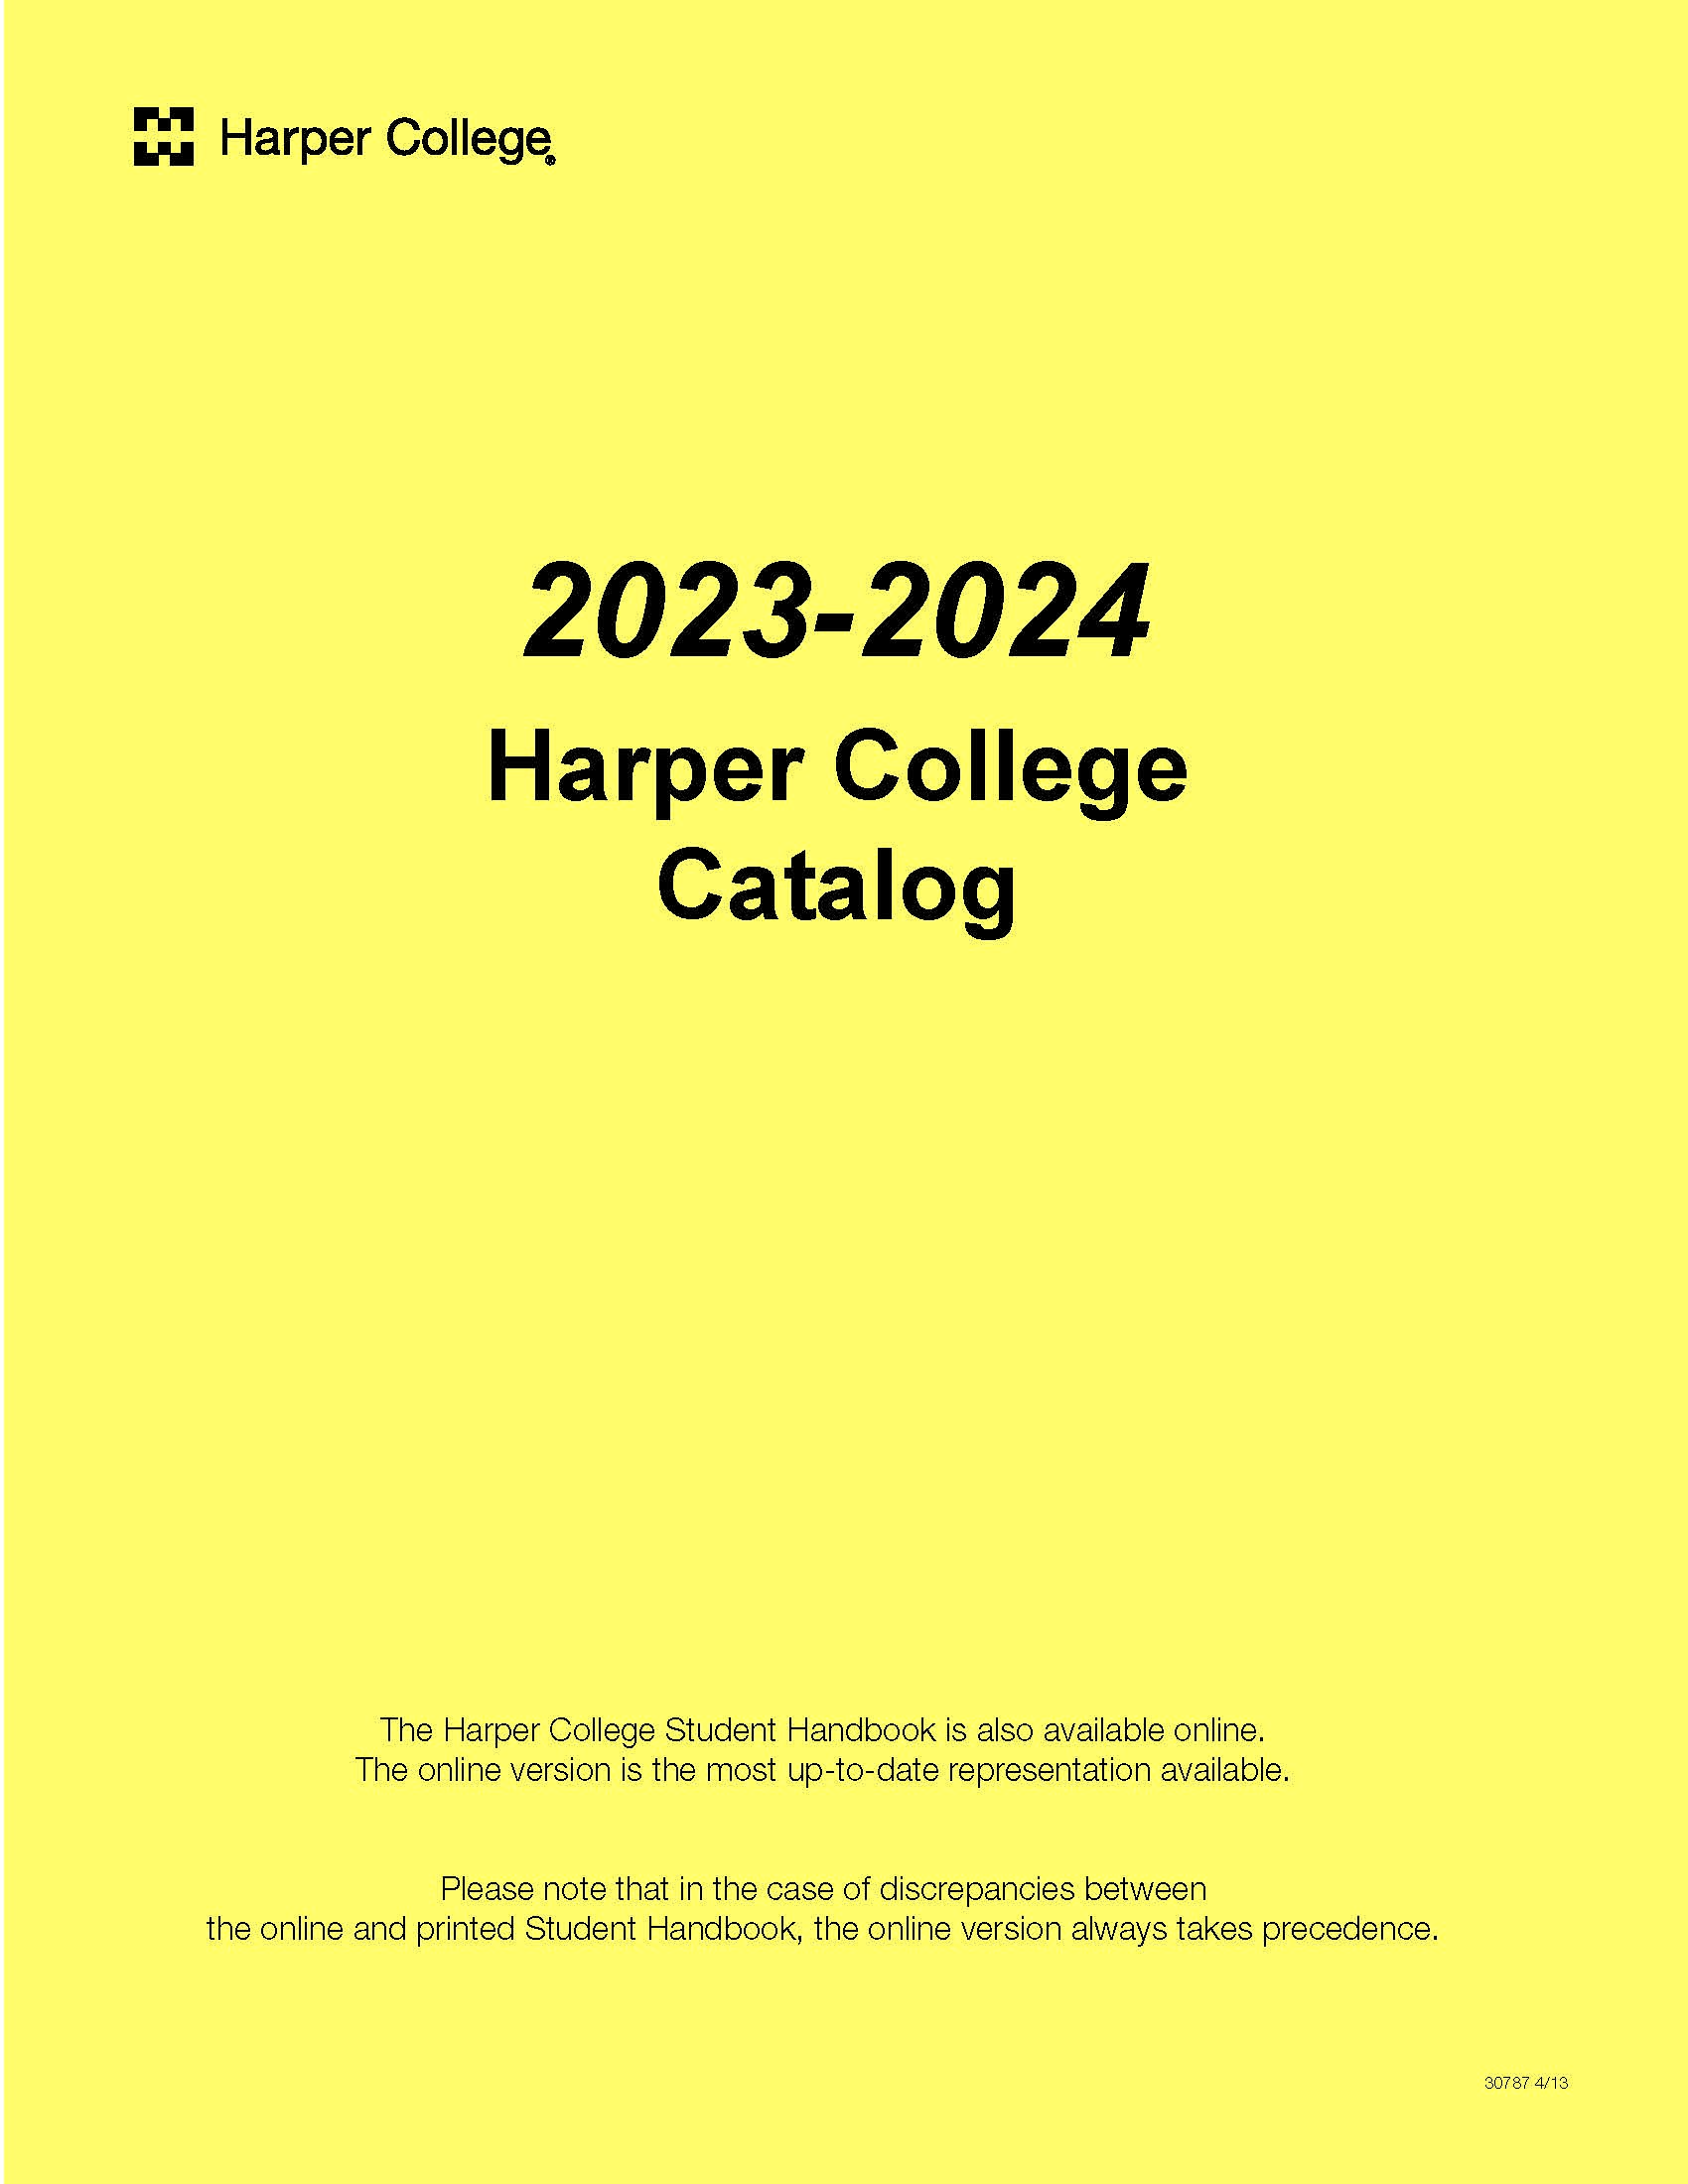  Catalog and Student Handbook cover